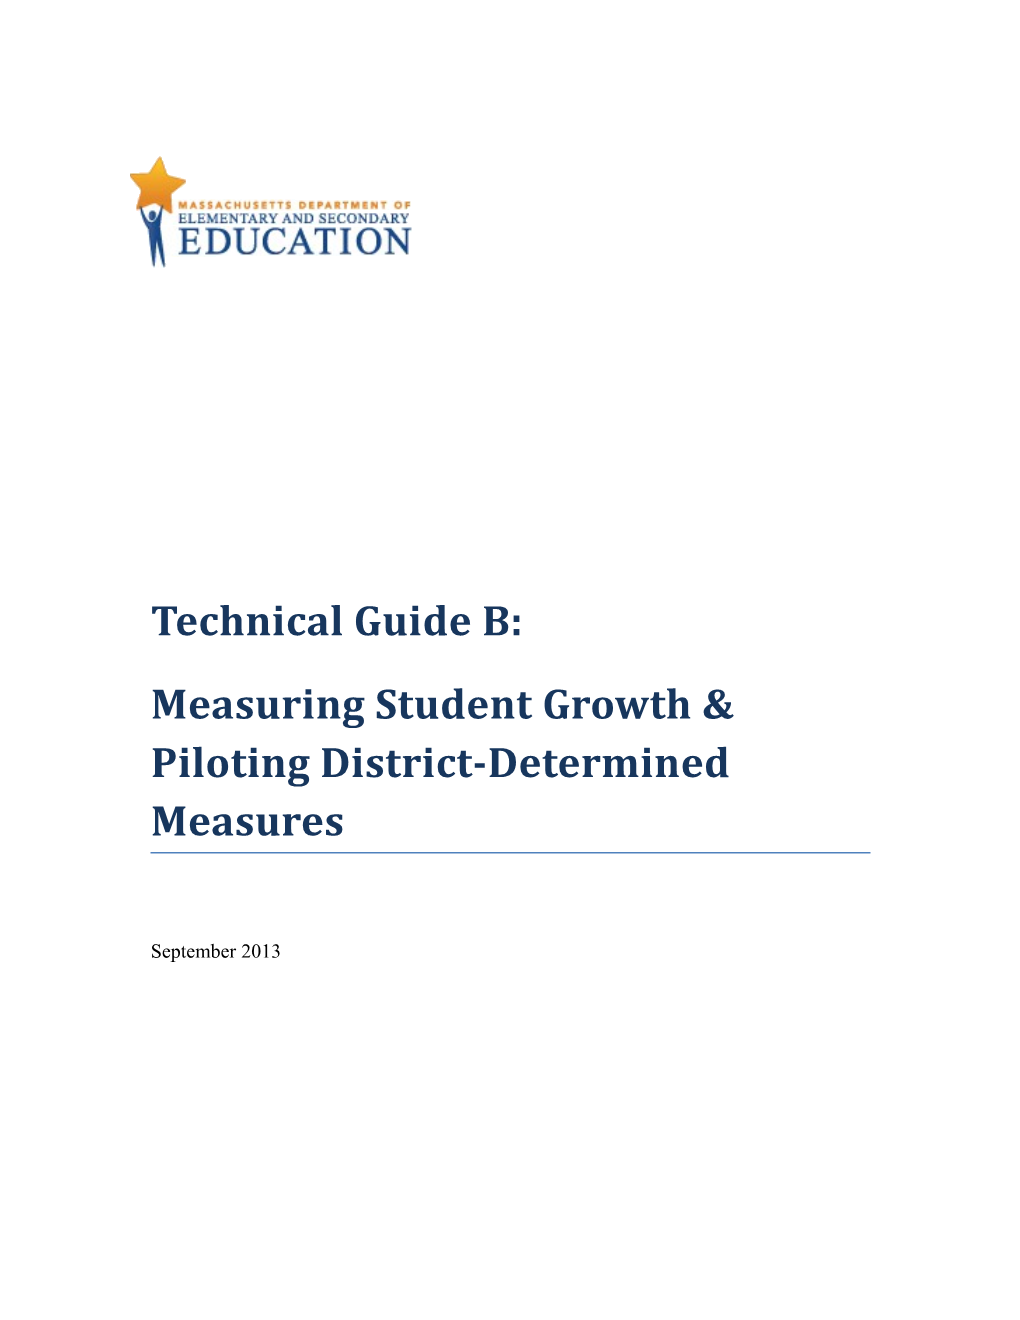 Technical Guide B: Measuring Student Growth & Piloting Ddms